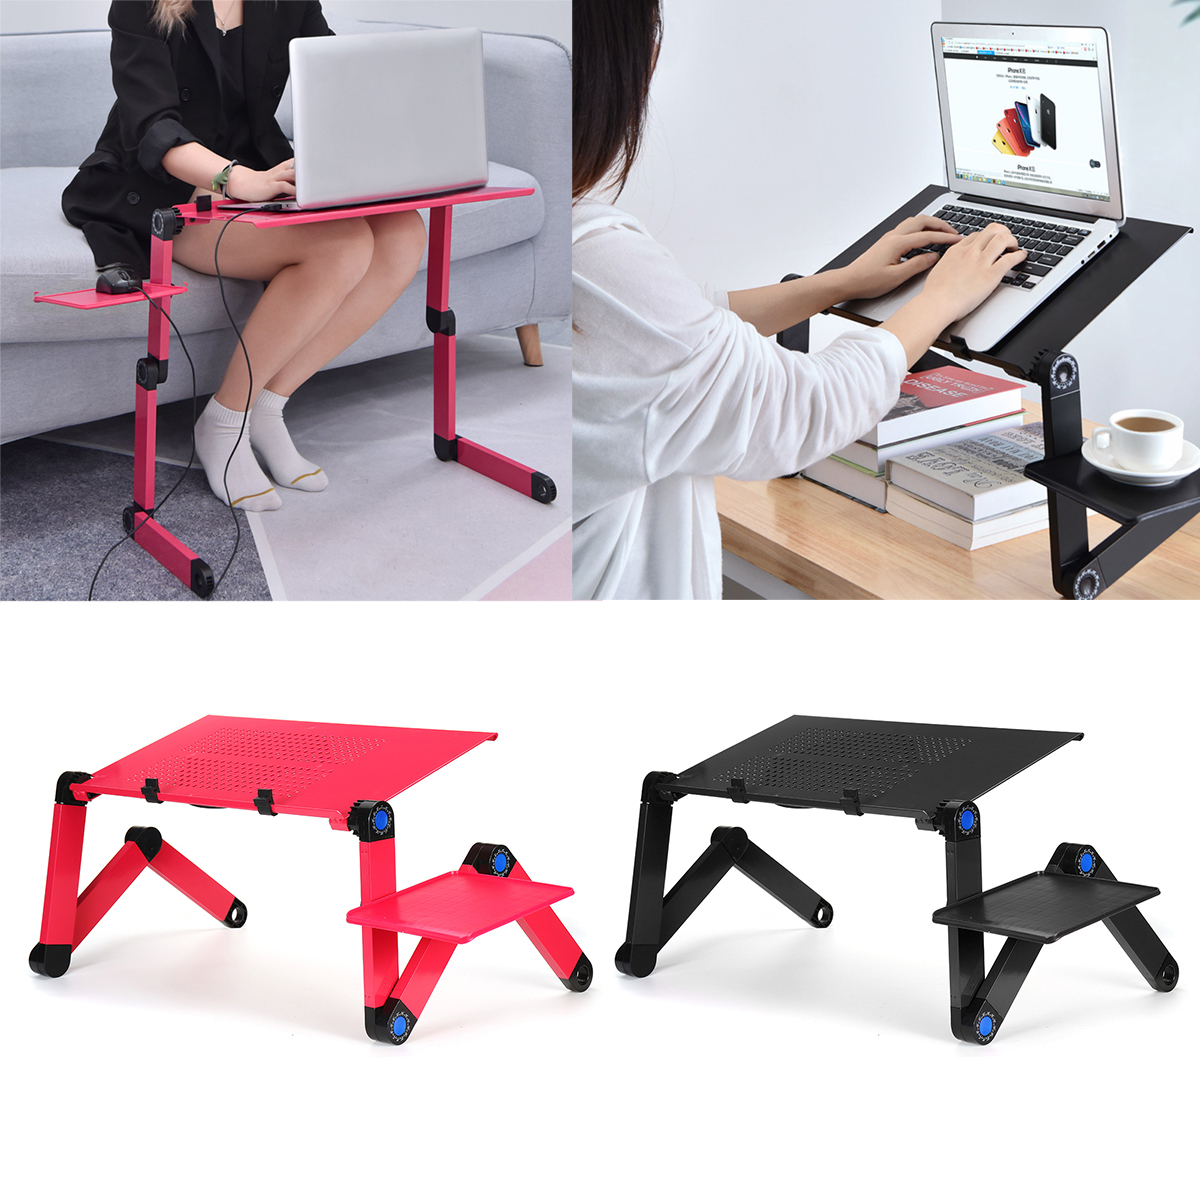 Adjustable-Laptop-Stand-Desk-Notebook-Bracket-Fan-Cooling-Pad-Game-Notebook-Base-with-Mouse-Board-fo-1757095-9